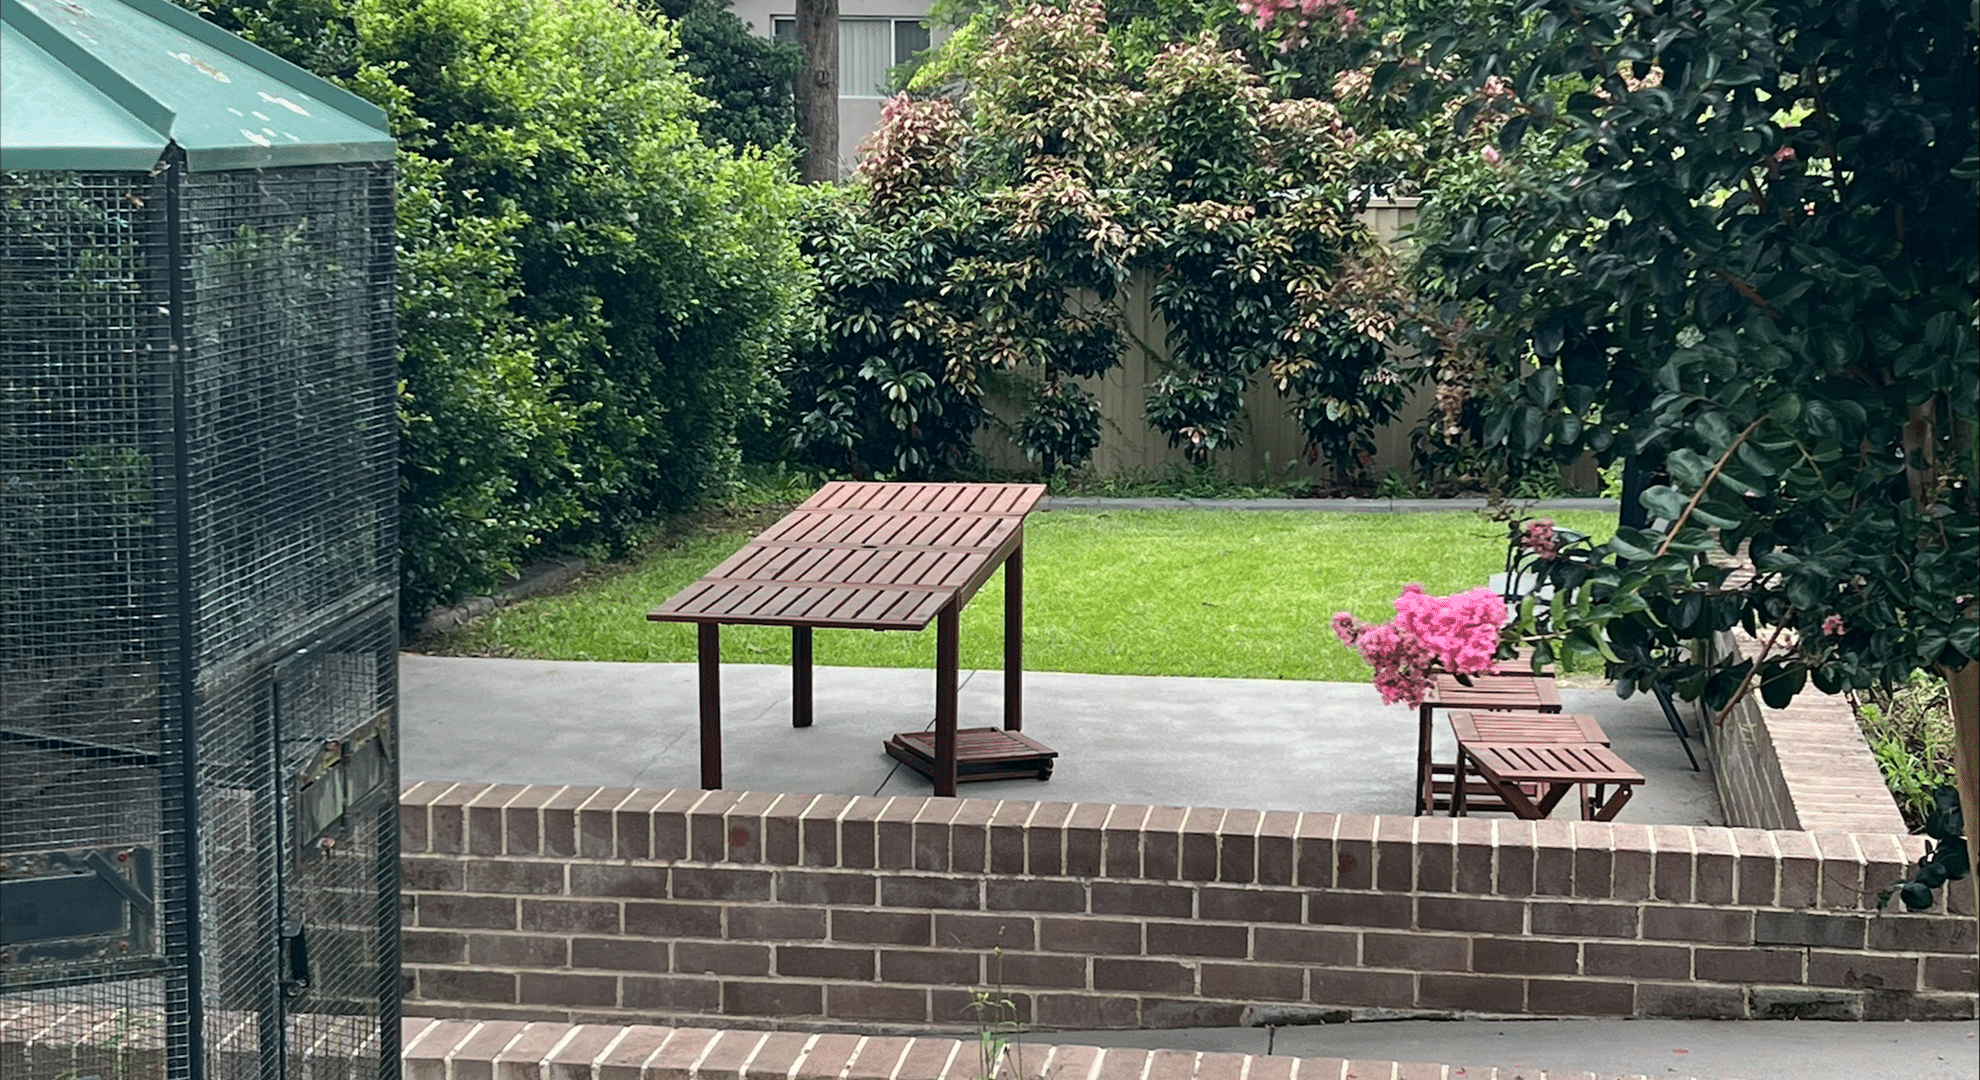 View of the backyard with trees, grassed yard and concrete seating area.